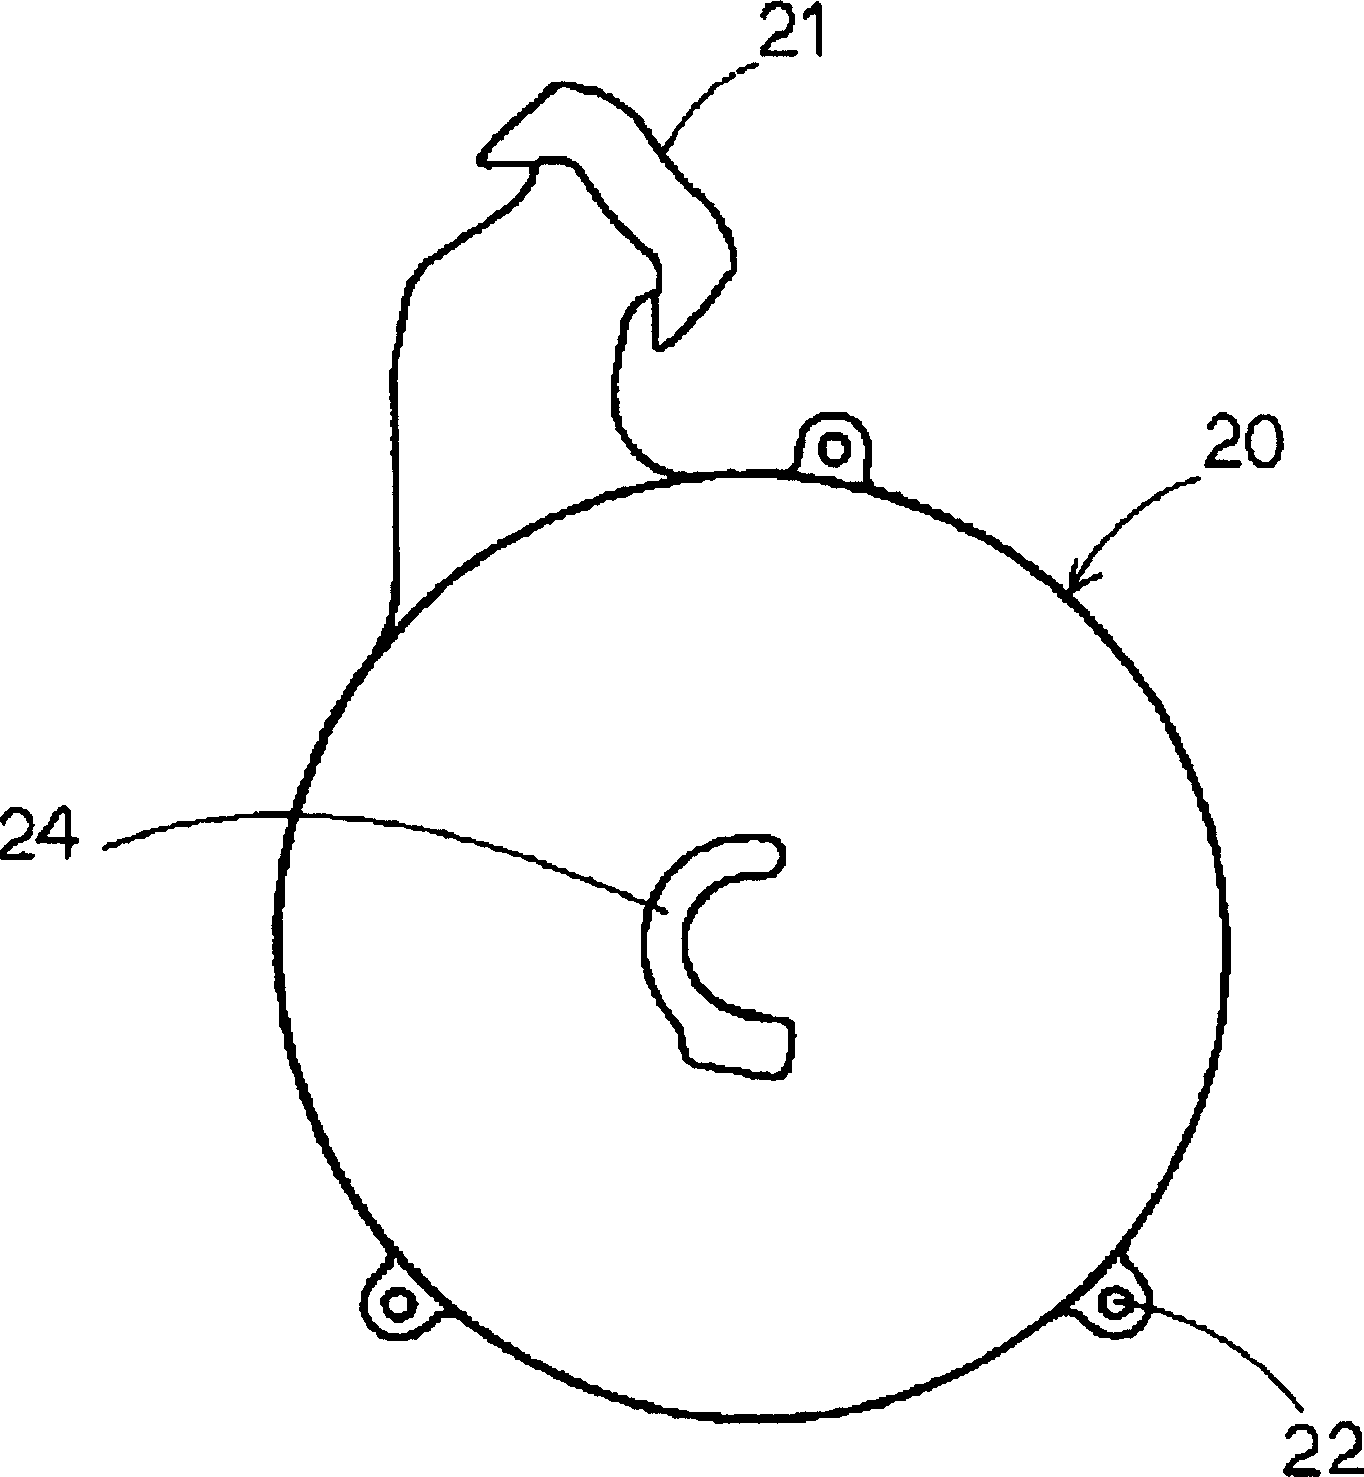 Meter for body component